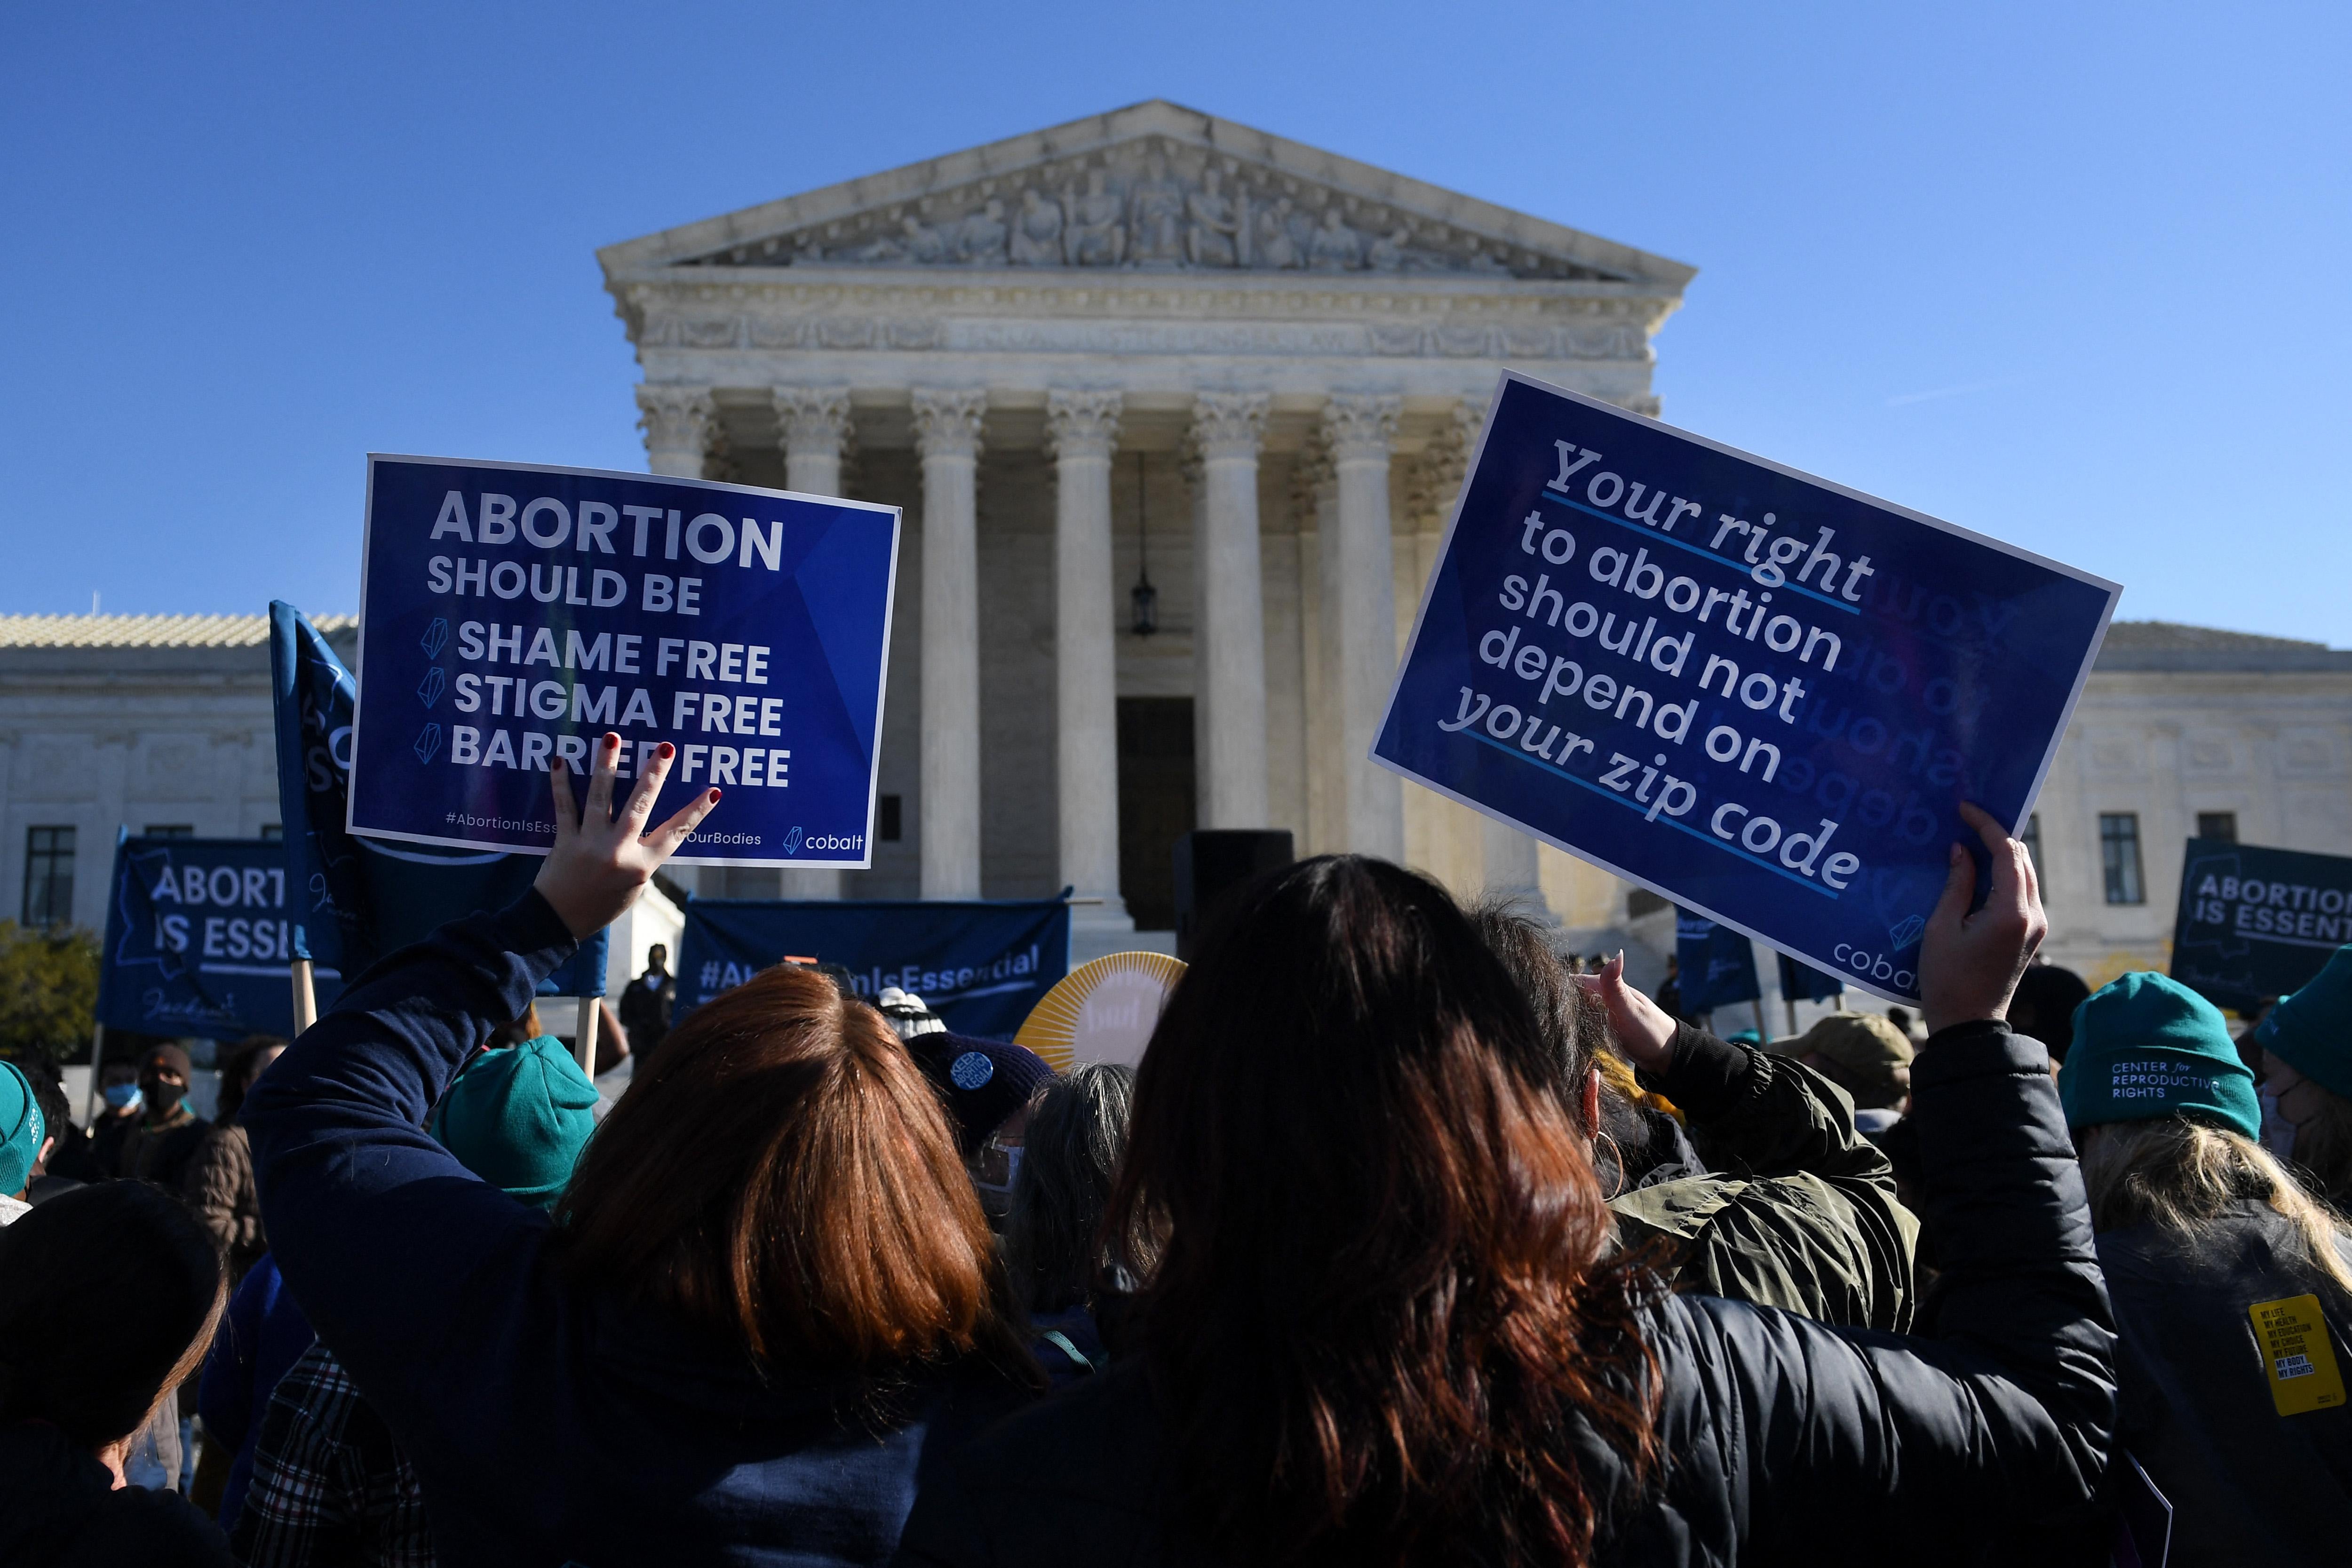 Abortion advocates hold protest signs outside the Supreme Court.